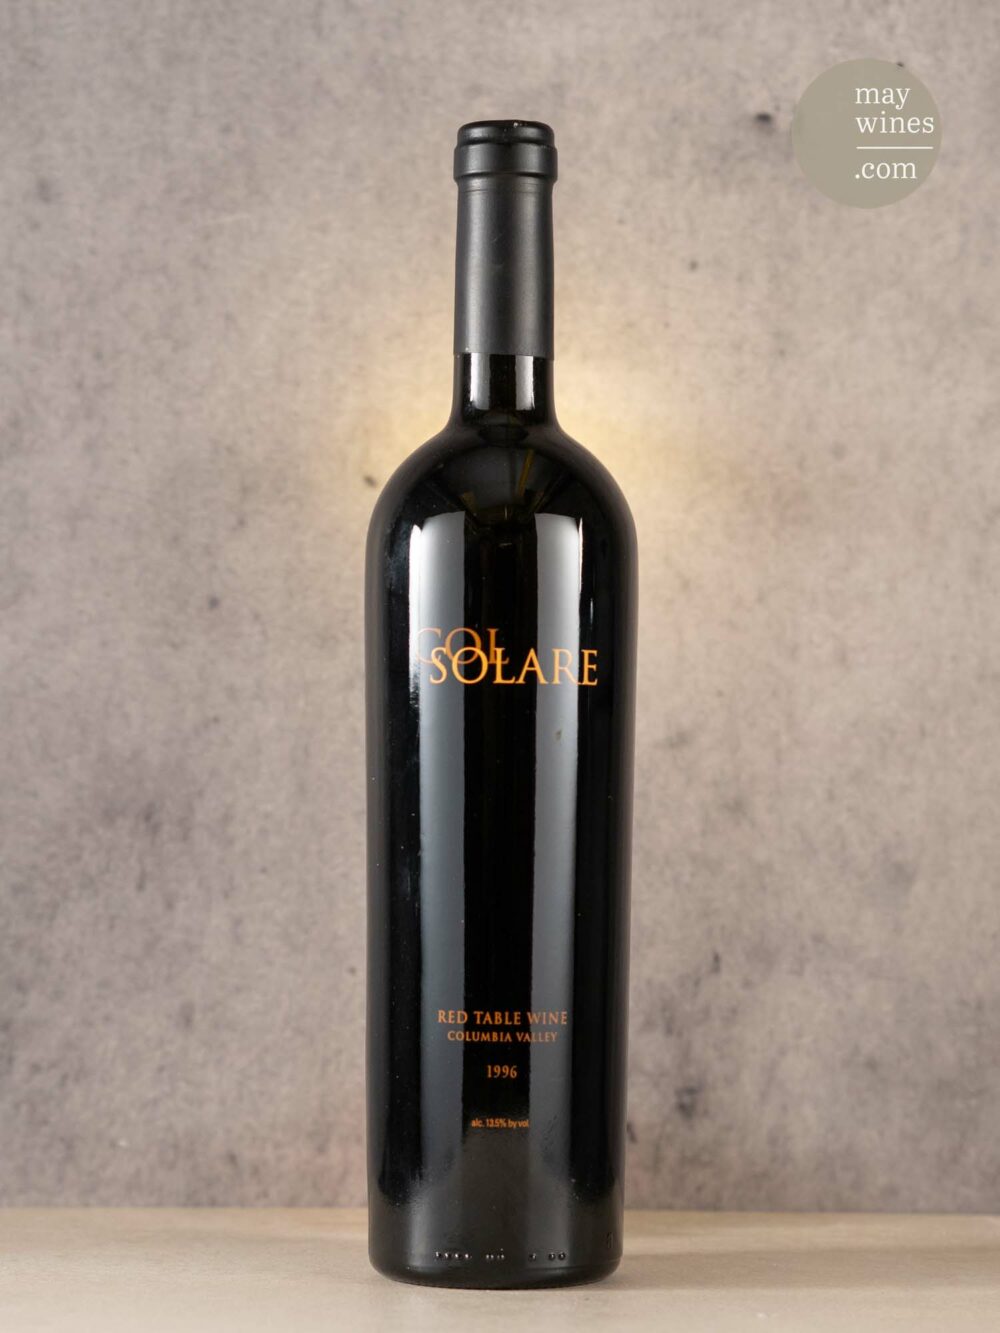 May Wines – Rotwein – 1996 Col Solare